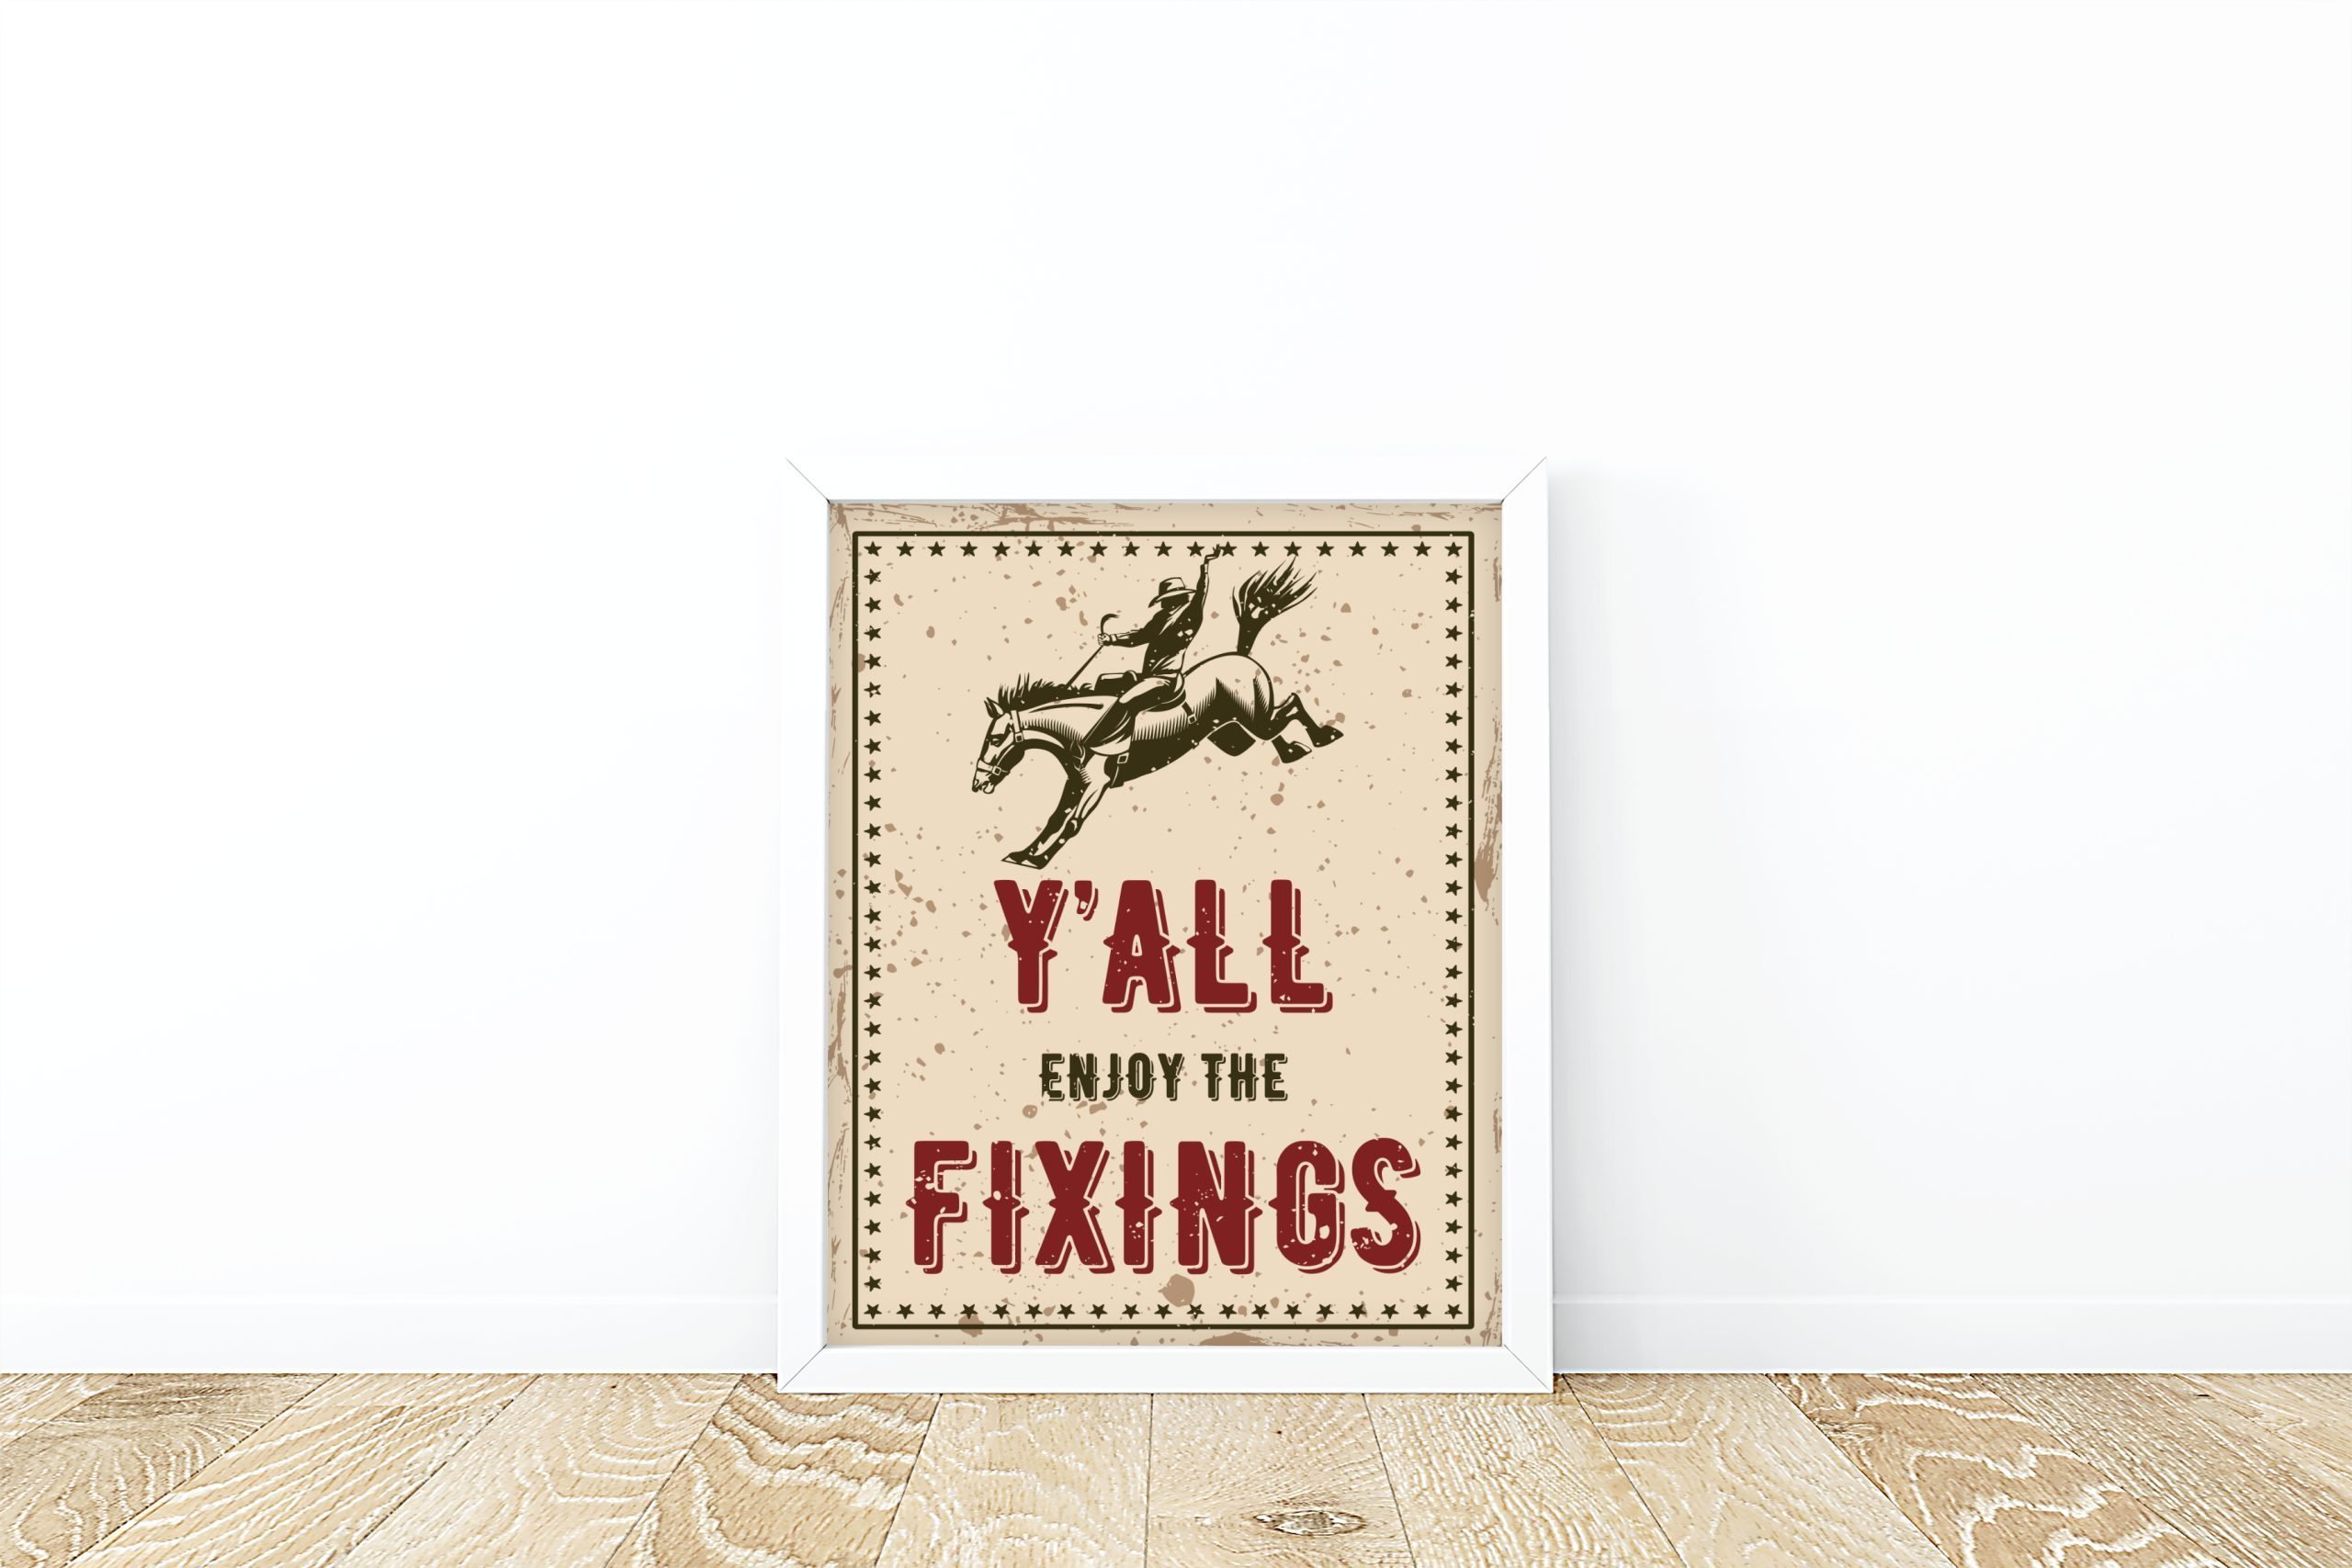 DECOR | SIGNS “Y’all Enjoy some fixings” Sign PRINTABLE Cowboy Party Food Table Decor 8x10" Non-Editable File